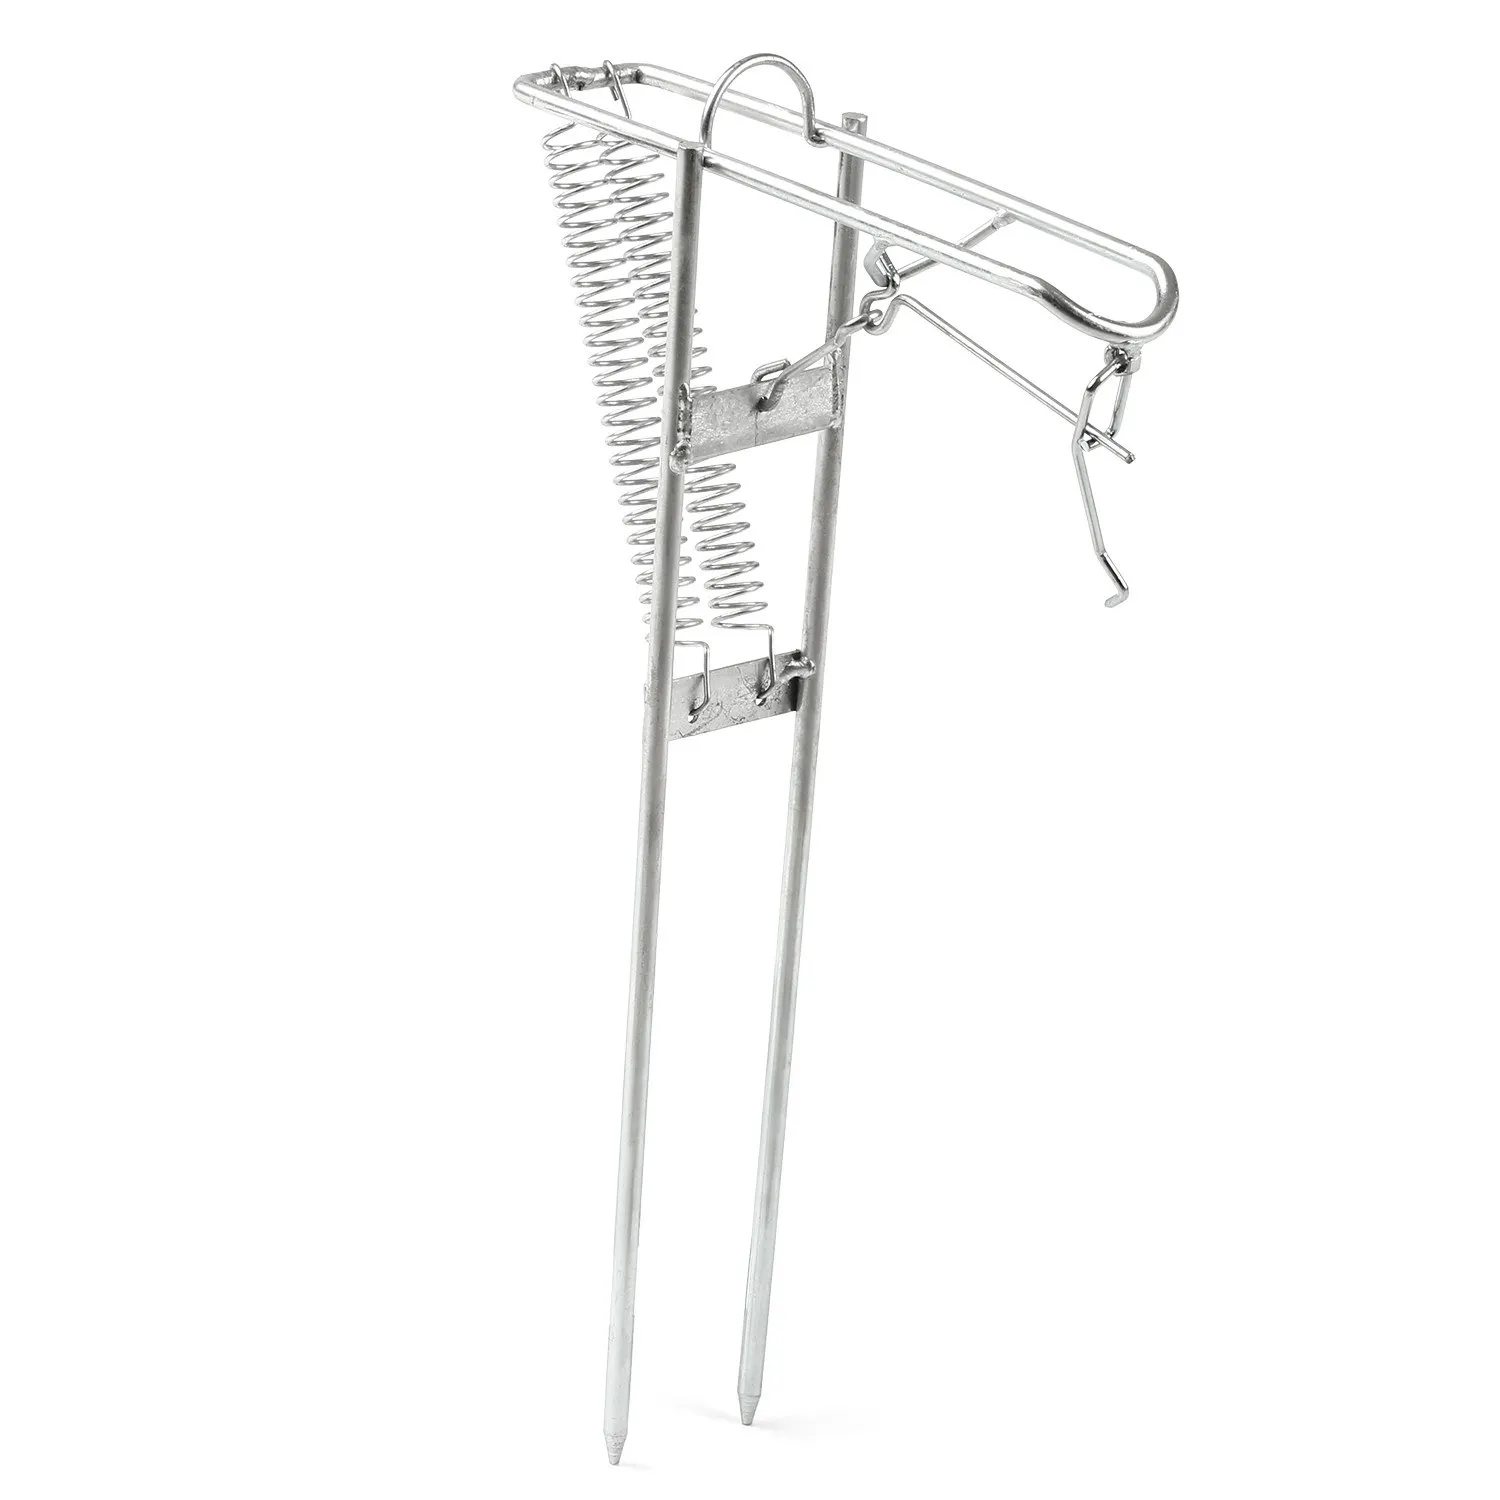 Stainless steel rod stand - rod holder for bank fishing automatic